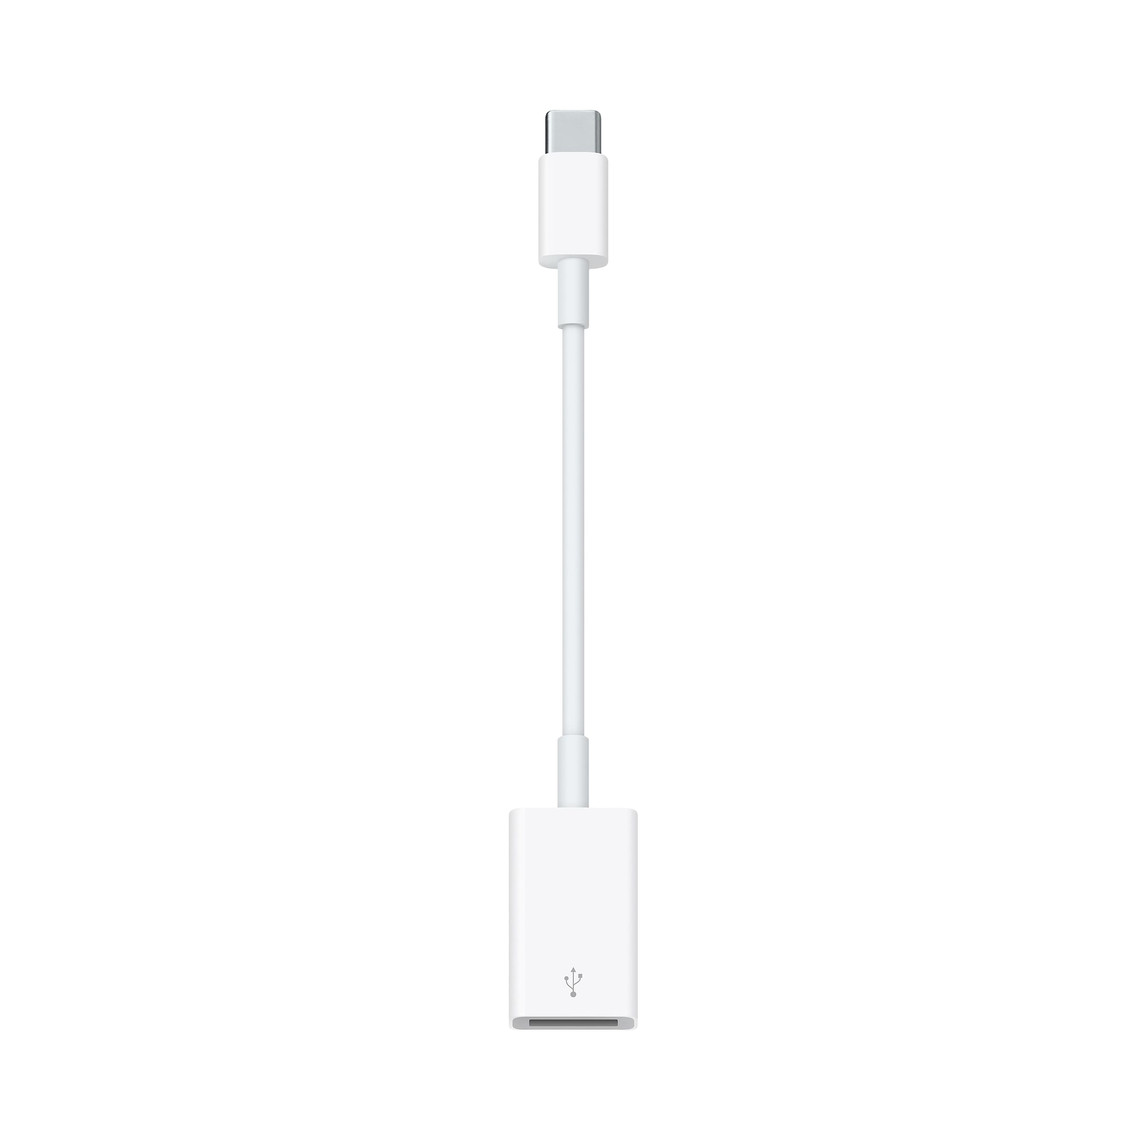 The USB-C to USB Adapter lets you connect iOS devices and standard USB accessories to a USB-C– or Thunderbolt 3 (USB-C)–enabled Mac.